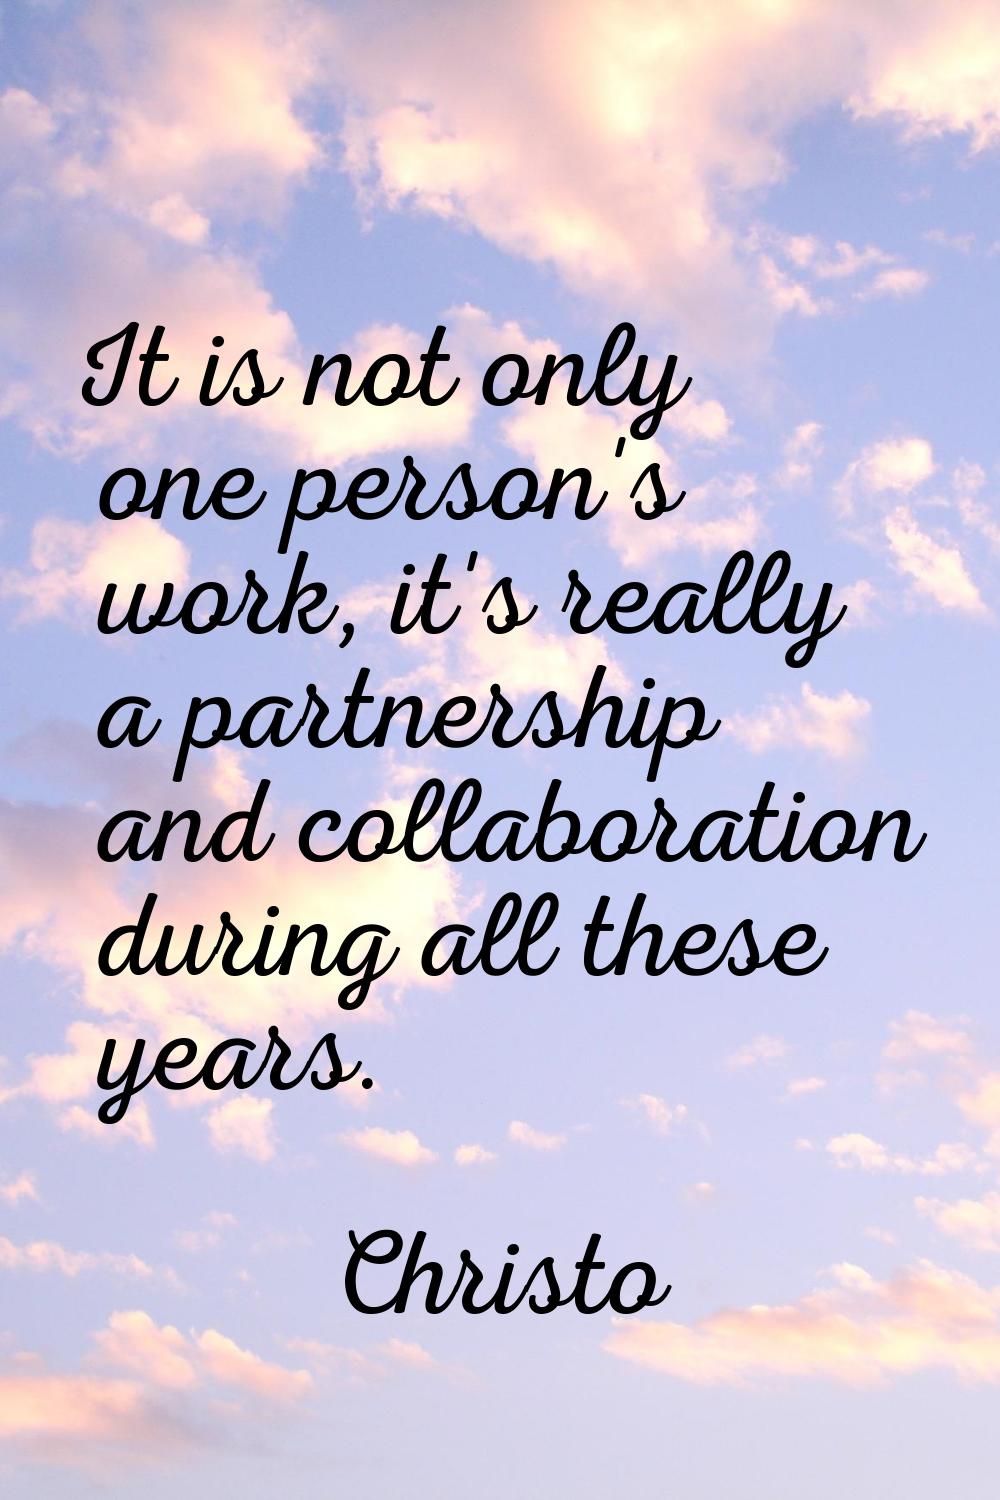 It is not only one person's work, it's really a partnership and collaboration during all these year